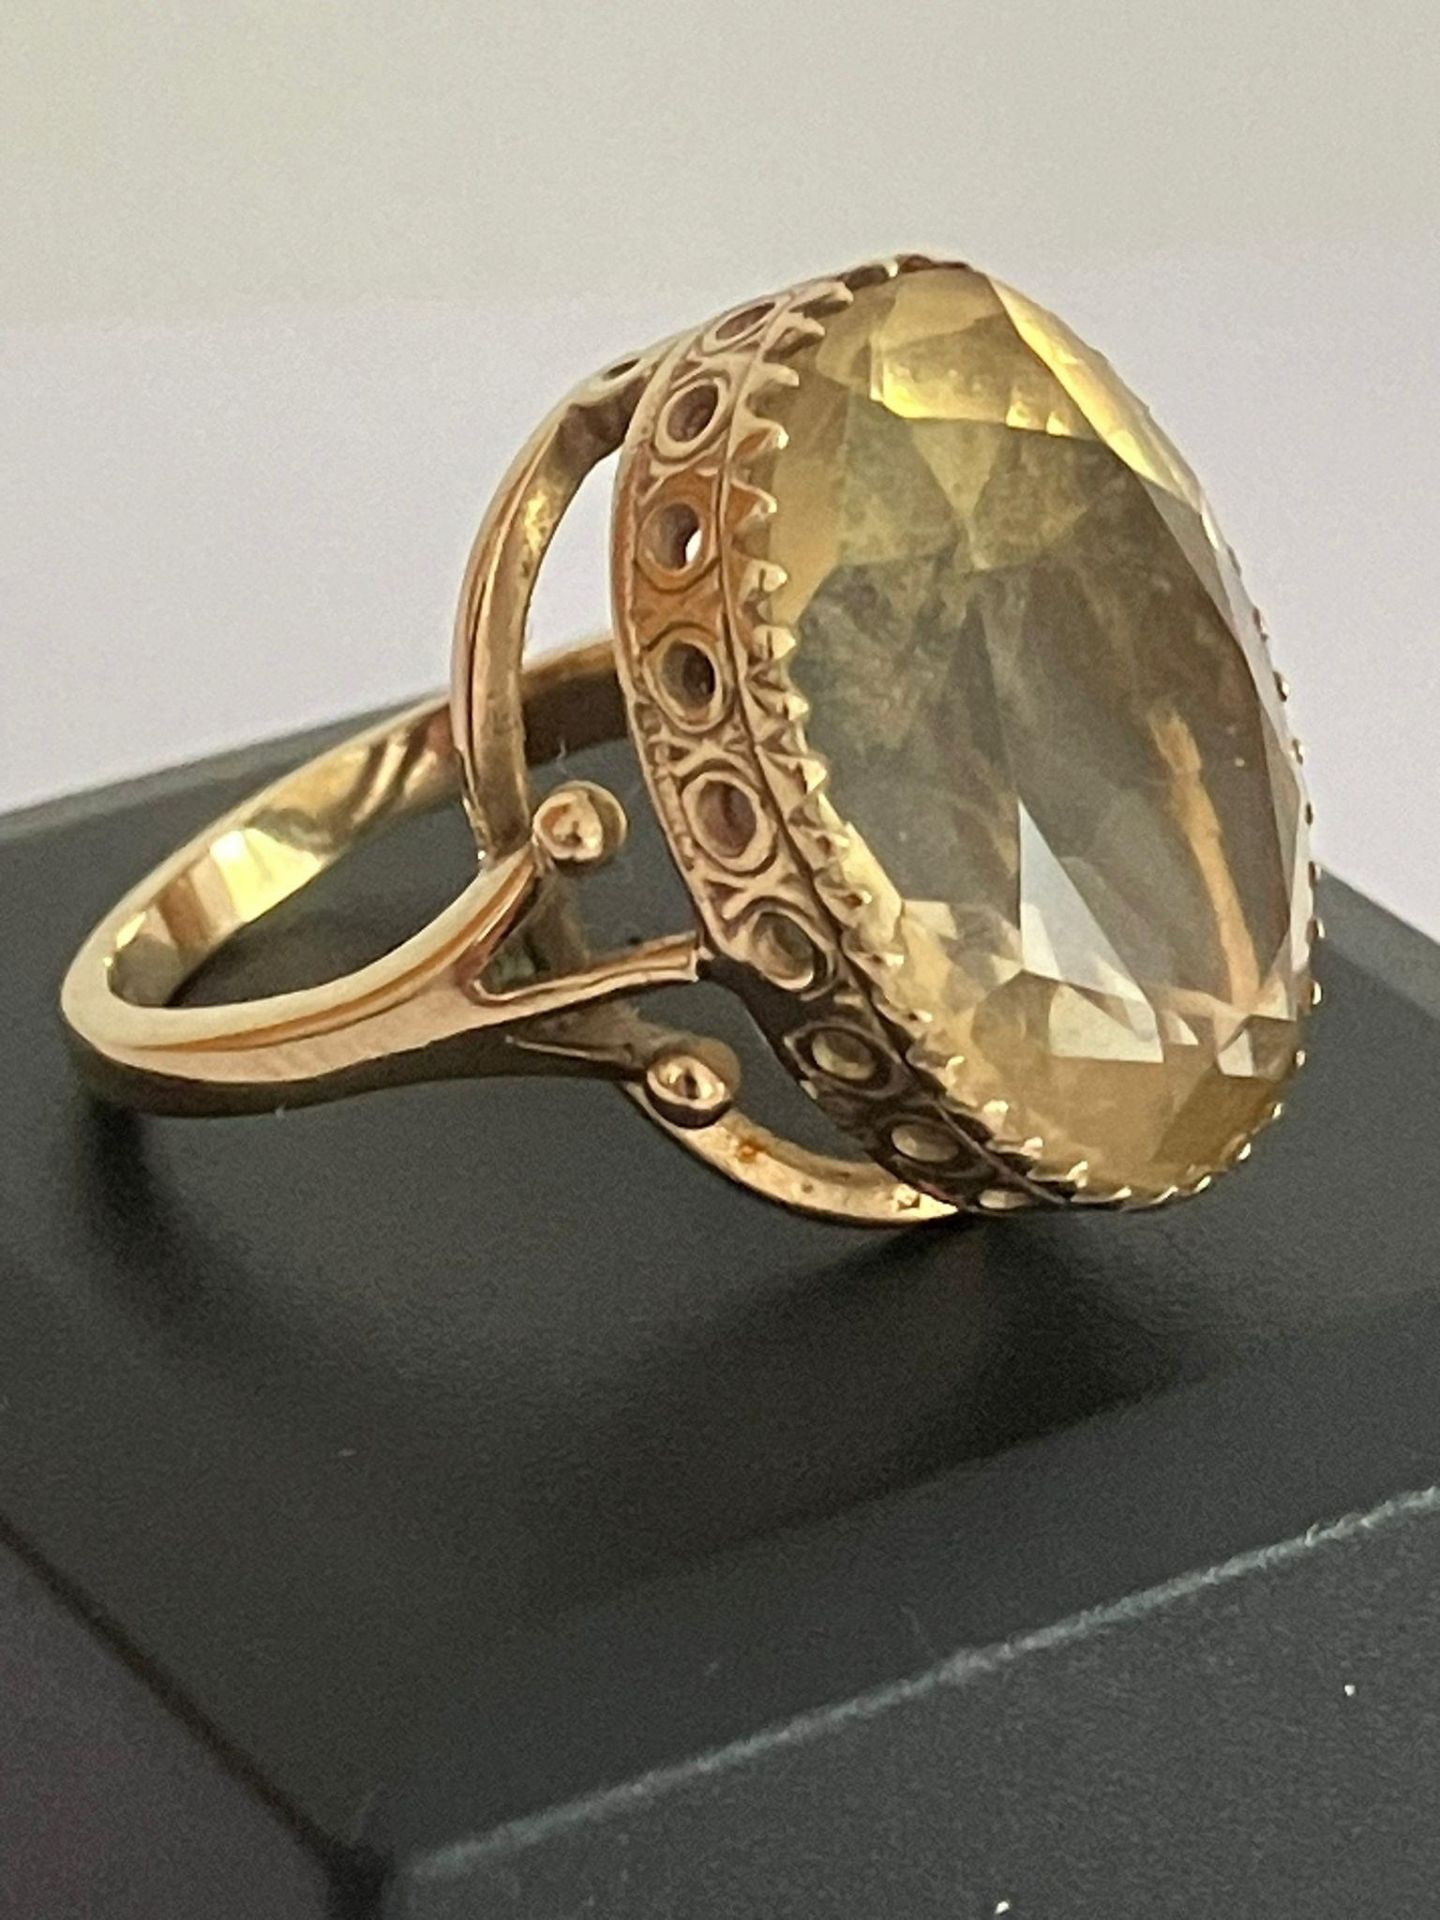 Fabulous 8 carat oval cut CITRINE set in a 9 carat yellow GOLD RING. The ring having a beautiful